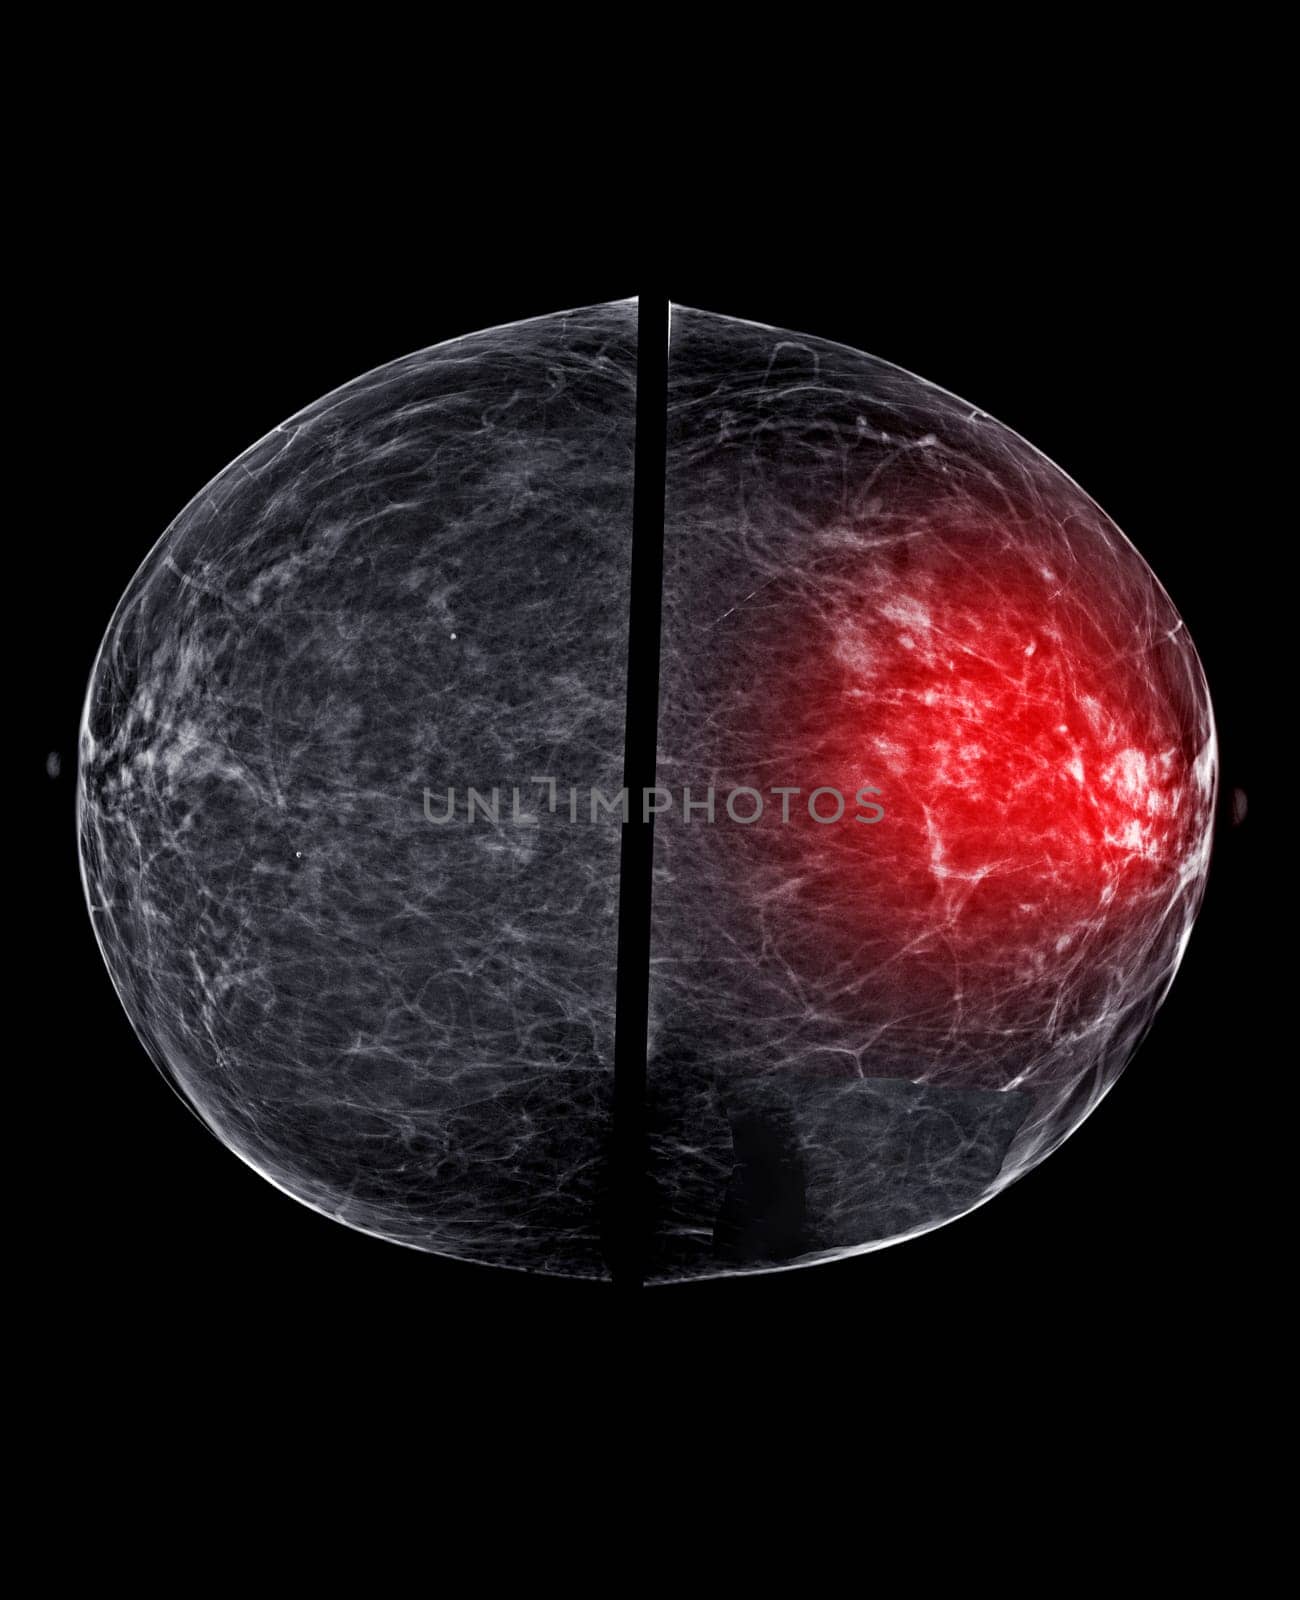 X-ray Digital Mammogram or mammography of both side breast Standard views are bilateral craniocaudal (CC) for screening Breast cancer and evidence of malignancy .